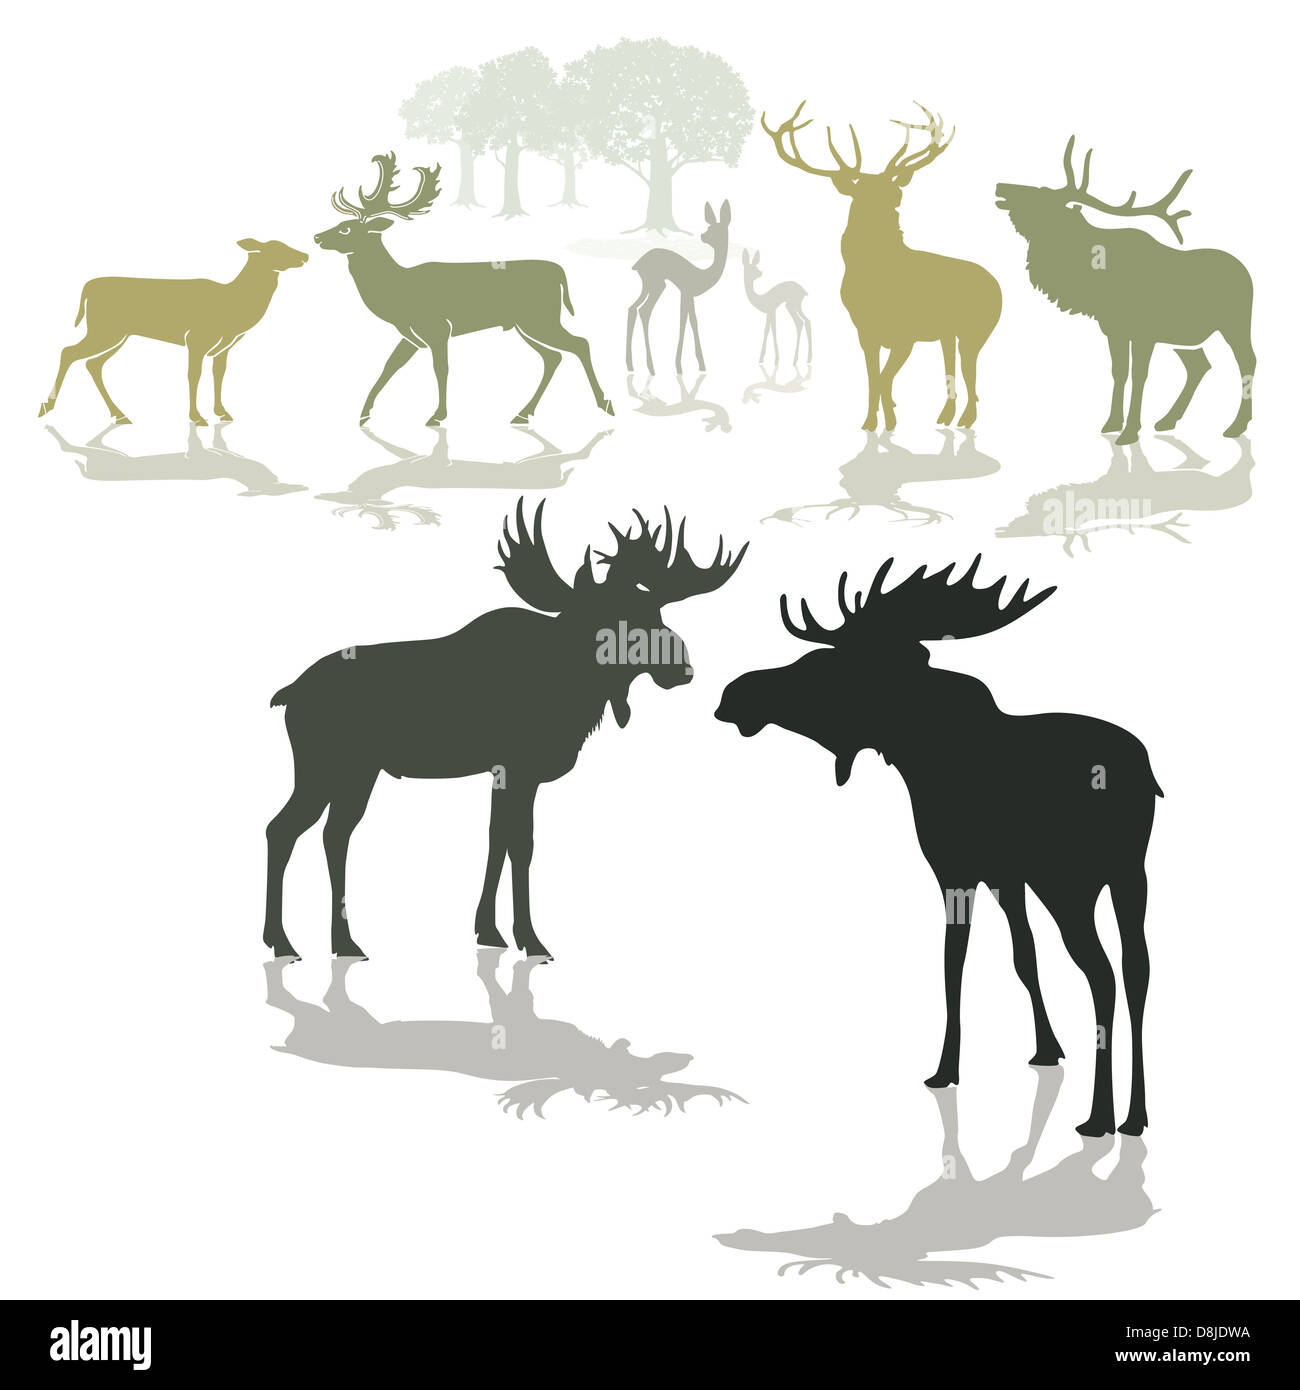 Elk, deer and fawn Stock Photo